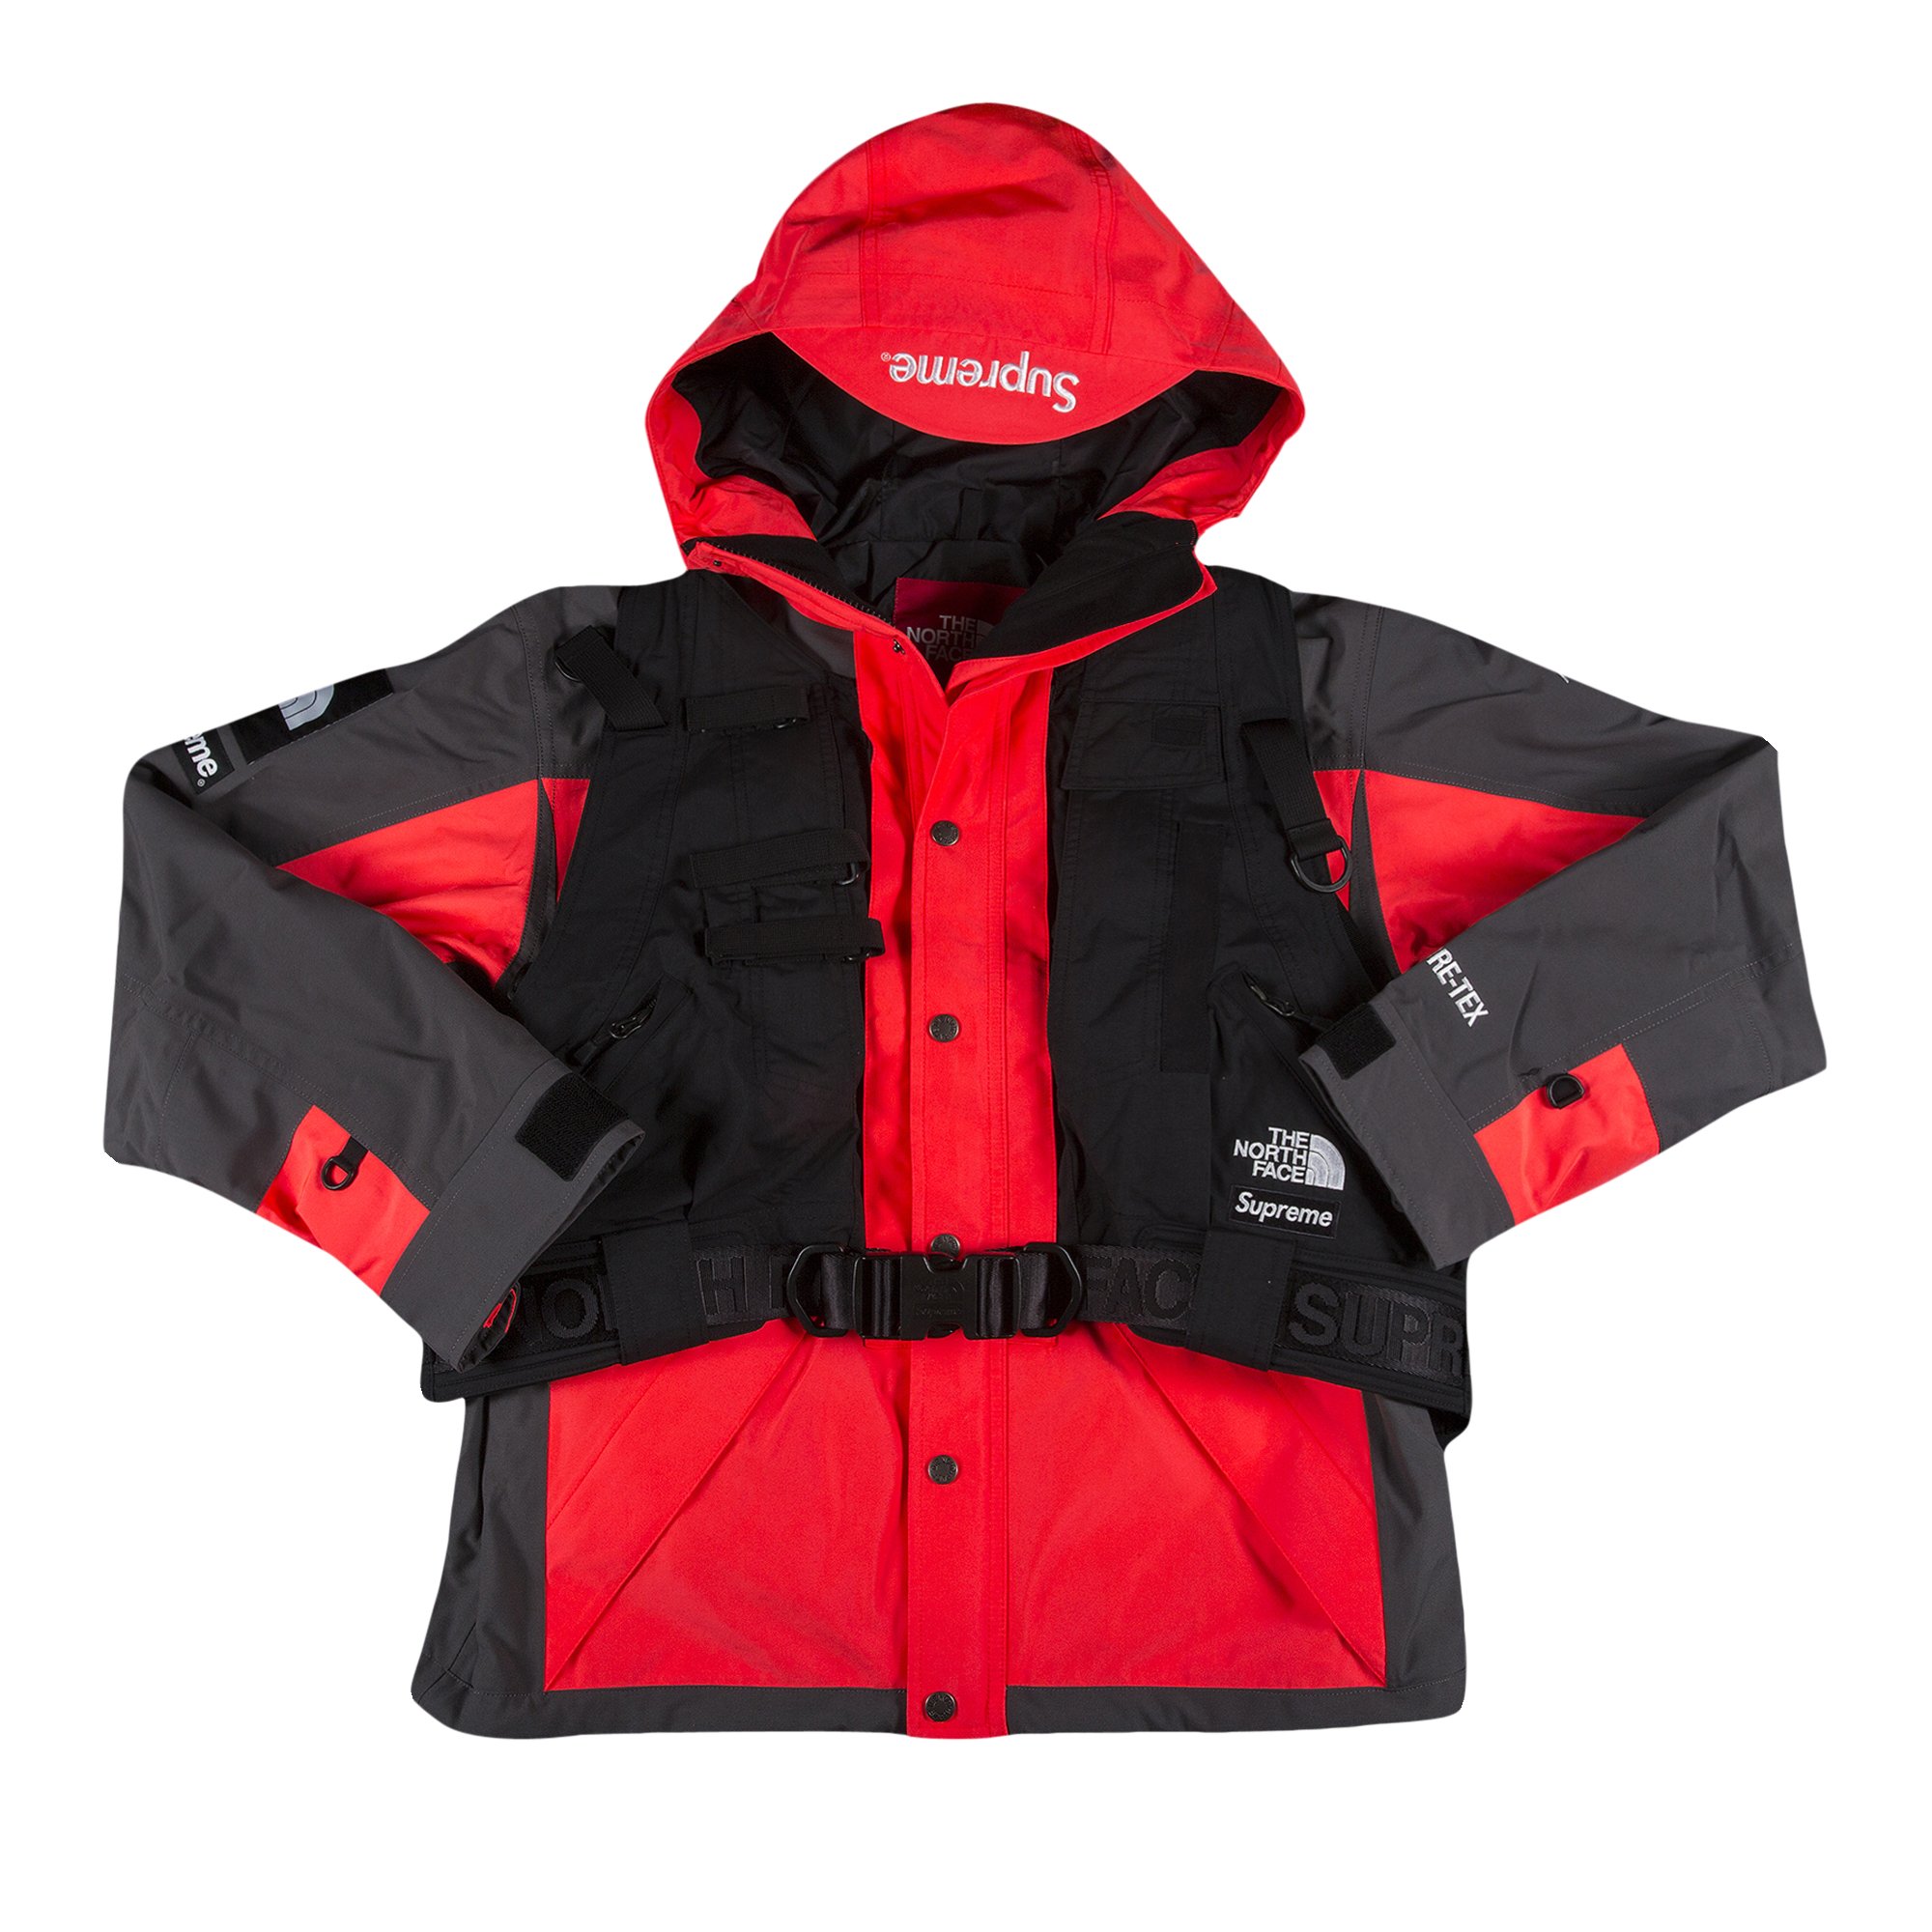 Buy Supreme x The North Face RTG Jacket + Vest 'Bright Red